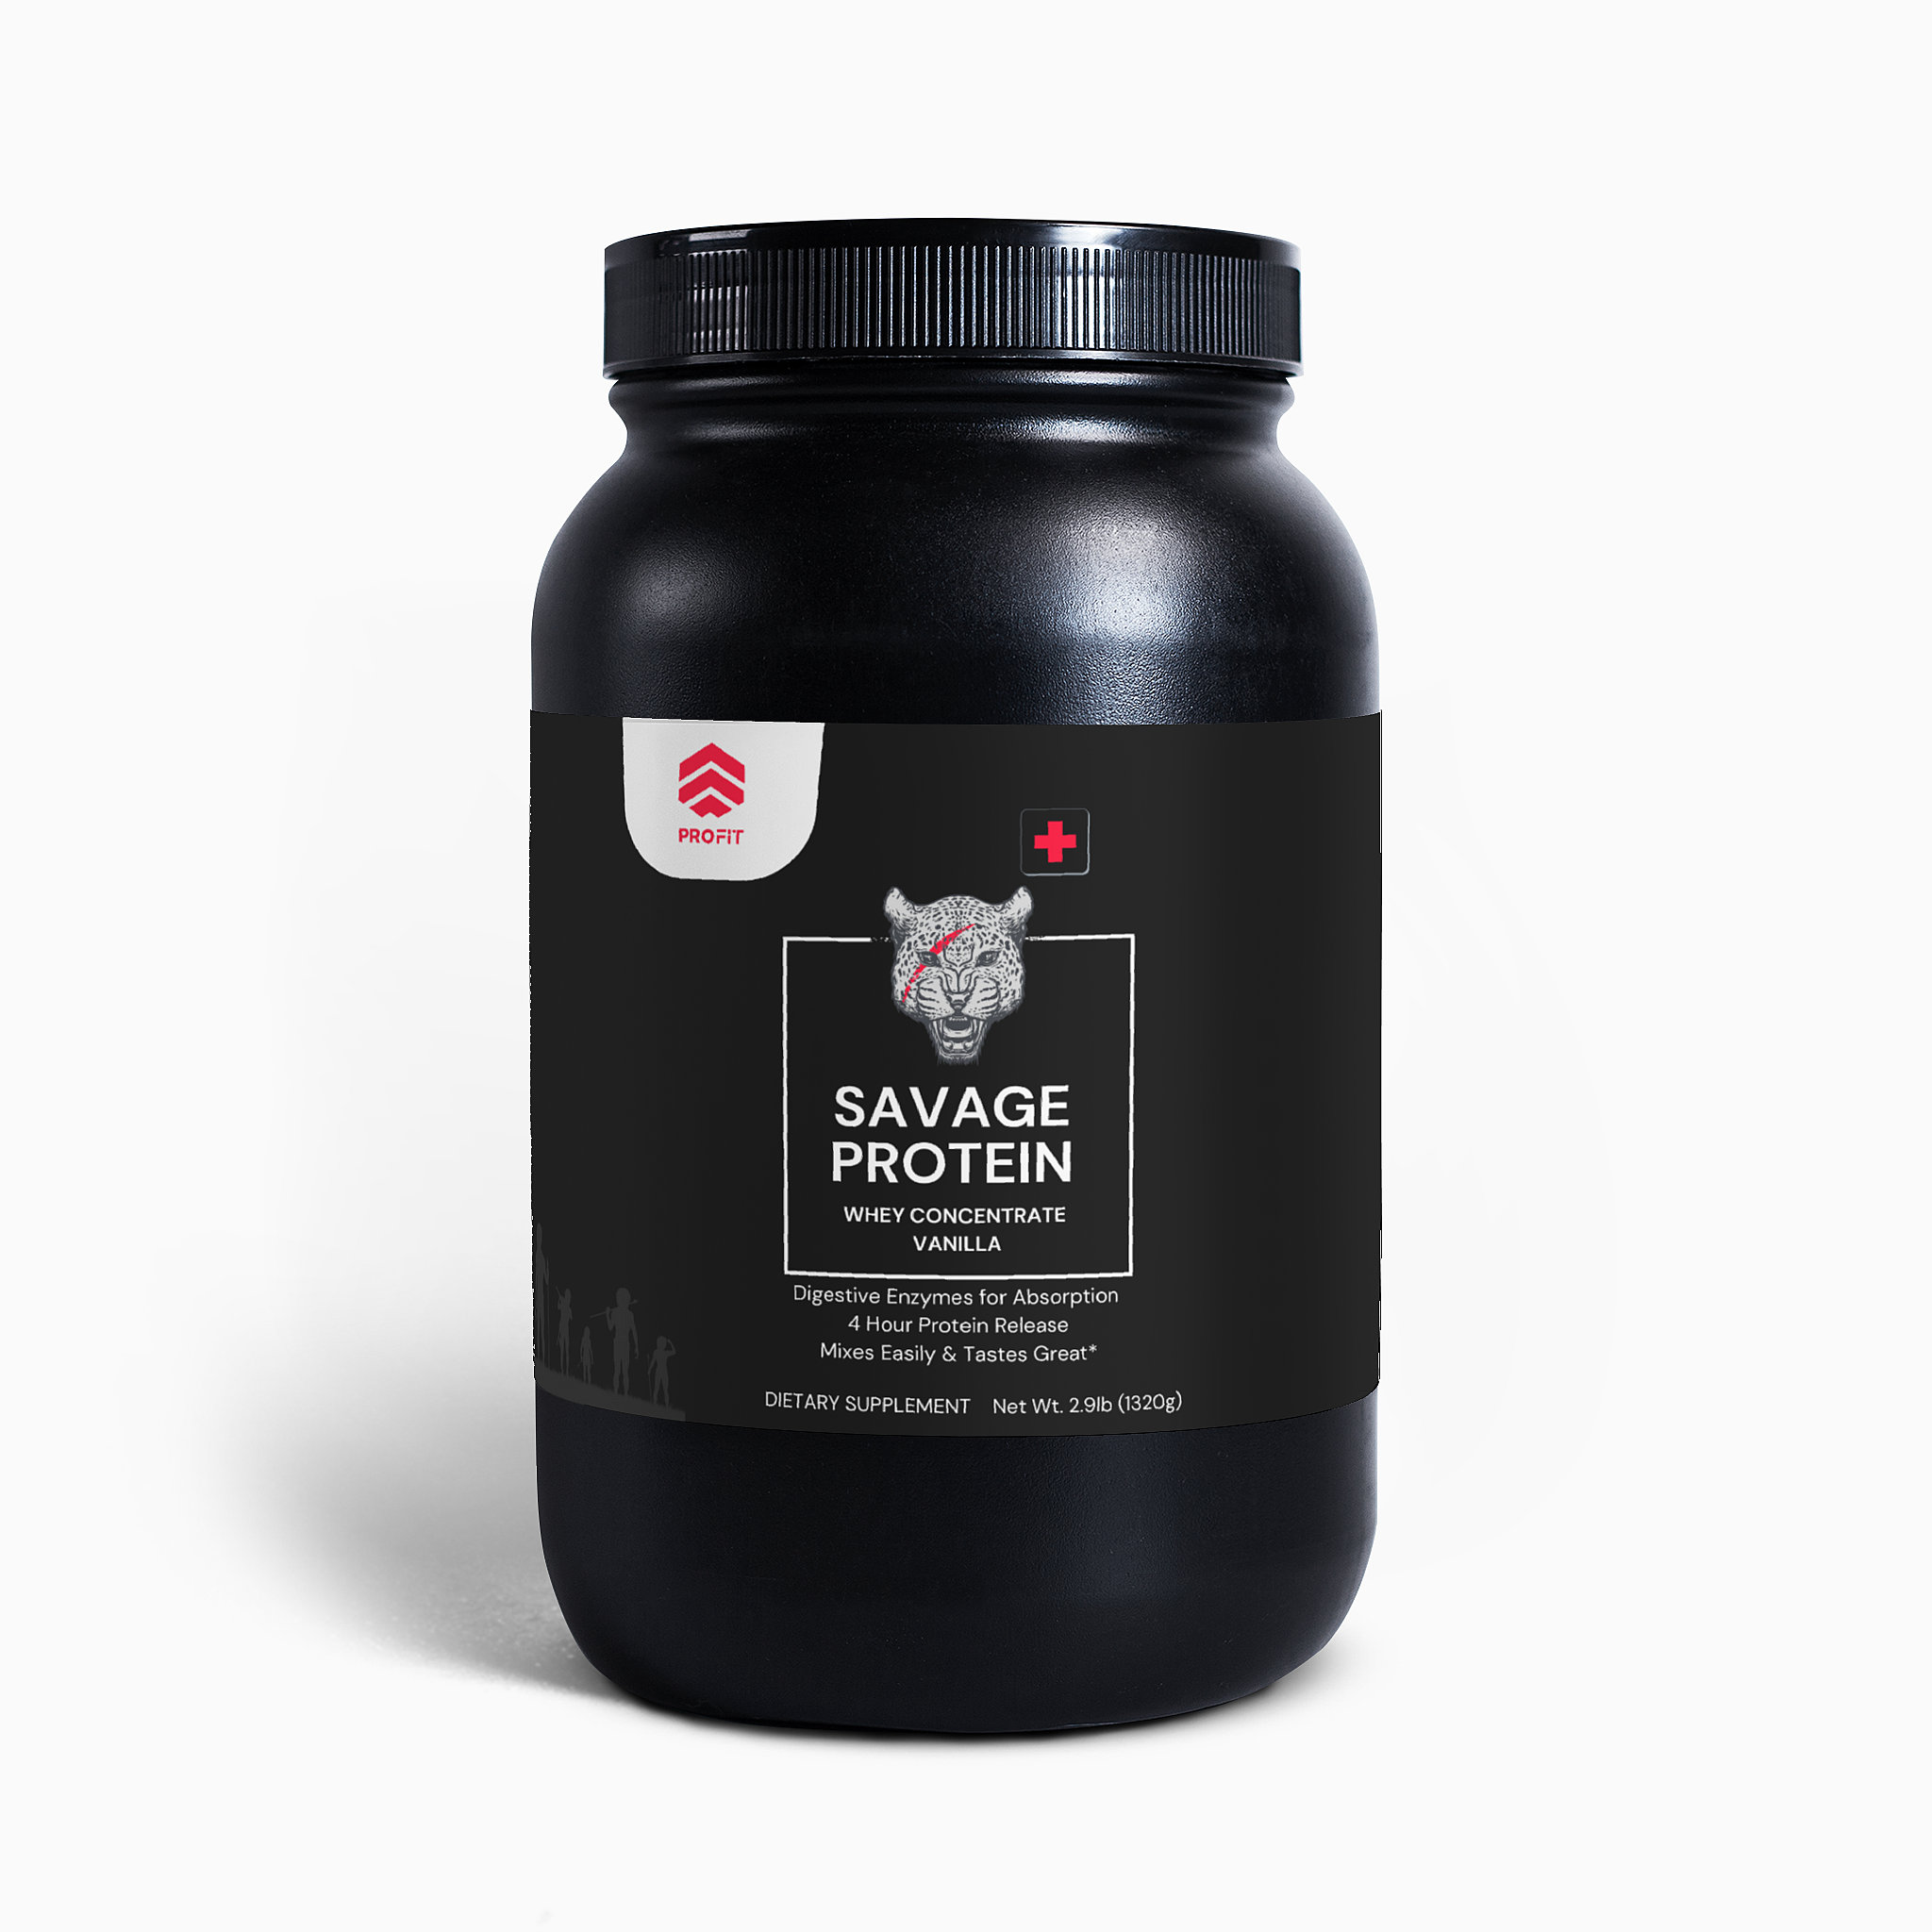 SAVAGE PROTEIN BY PROFIT